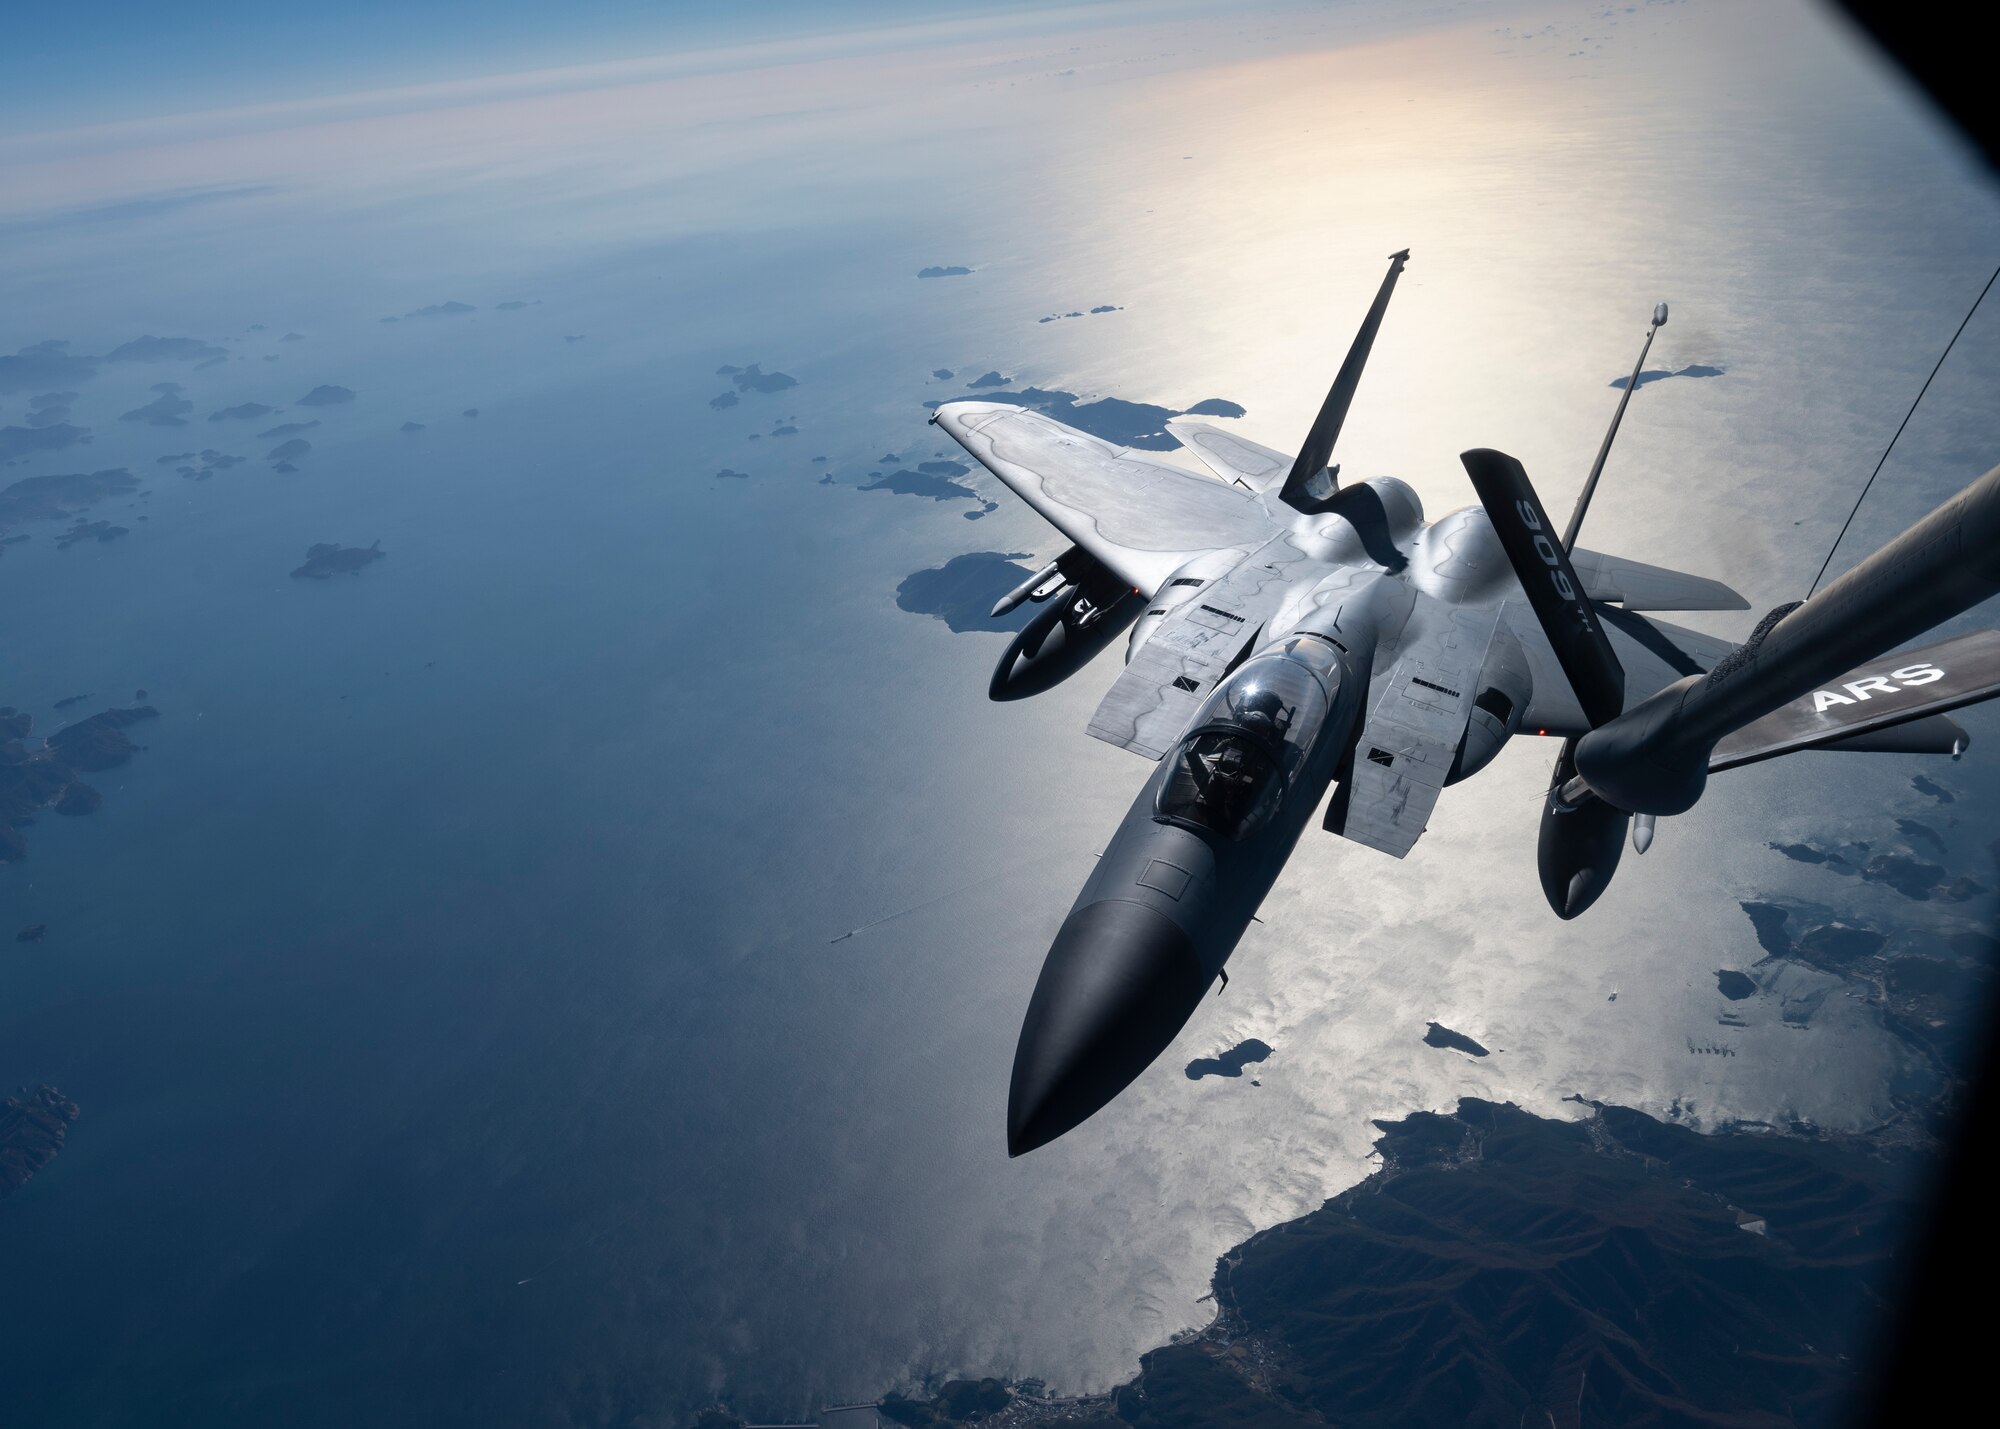 A U.S. Air Force 44th Fighter Squadron F-15C Eagle approaches a 909th Air Refueling Squadron KC-135 Stratotanker to conduct aerial refueling over South Korea, Nov. 4, 2022. Kadena's F-15's  were the first operational Eagles outfitted with an active electronically-scanned array radar, and the Legion Pod, the first infrared search-and-track system compatible with the aircraft. (U.S. Air Force photo by Senior Airman Jessi Roth)